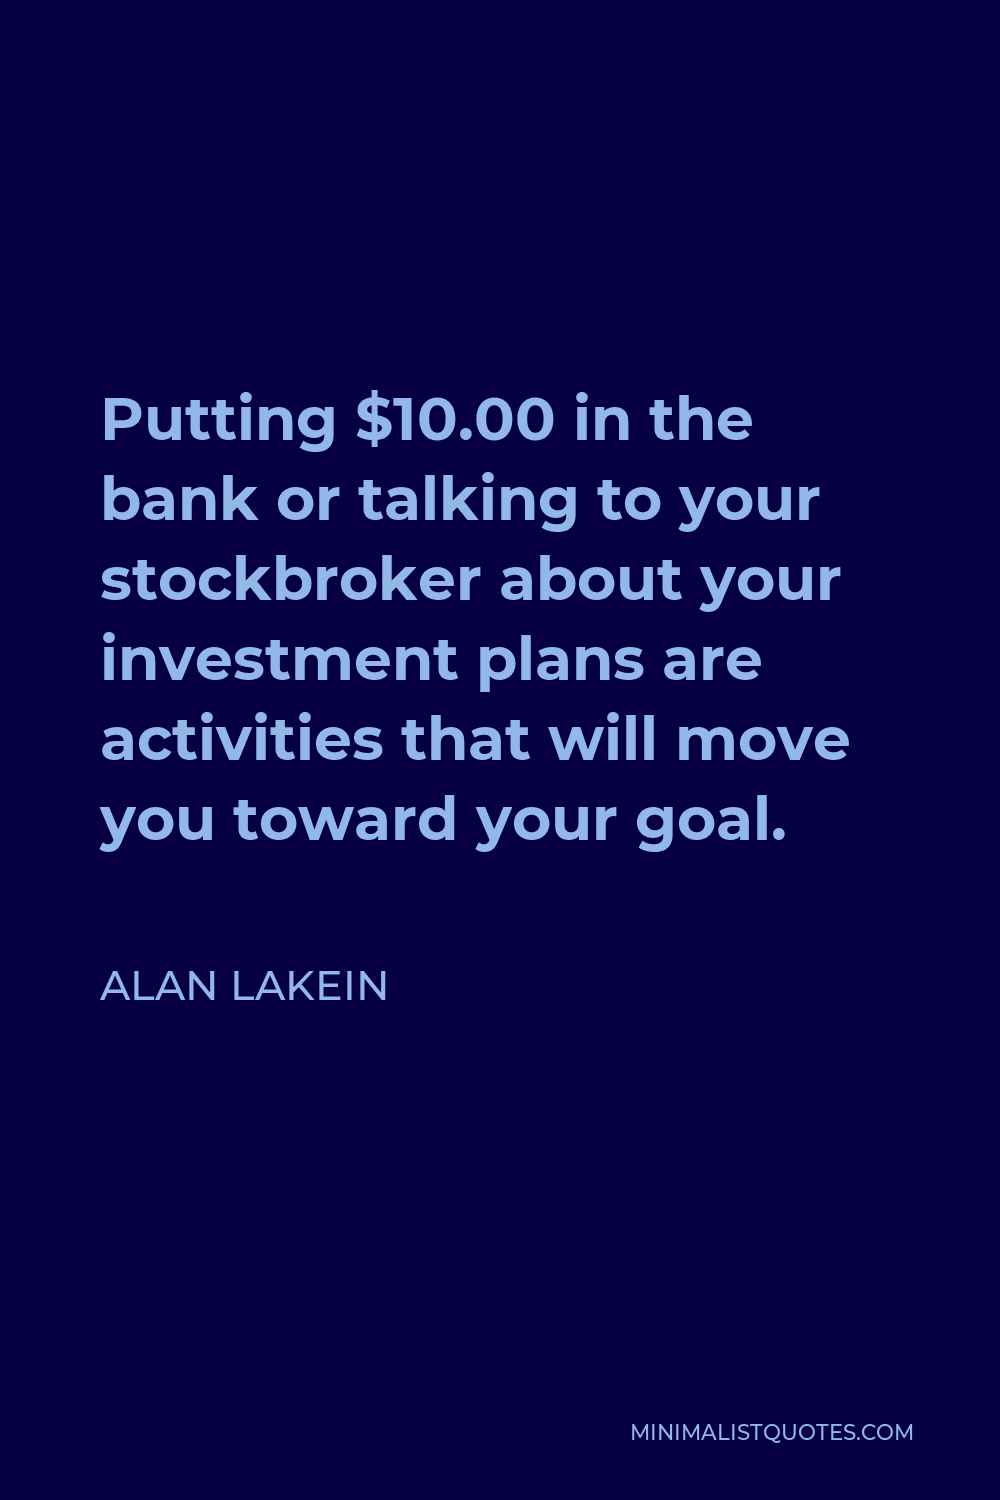 Alan Lakein Quote - Putting $10.00 in the bank or talking to your stockbroker about your investment plans are activities that will move you toward your goal.